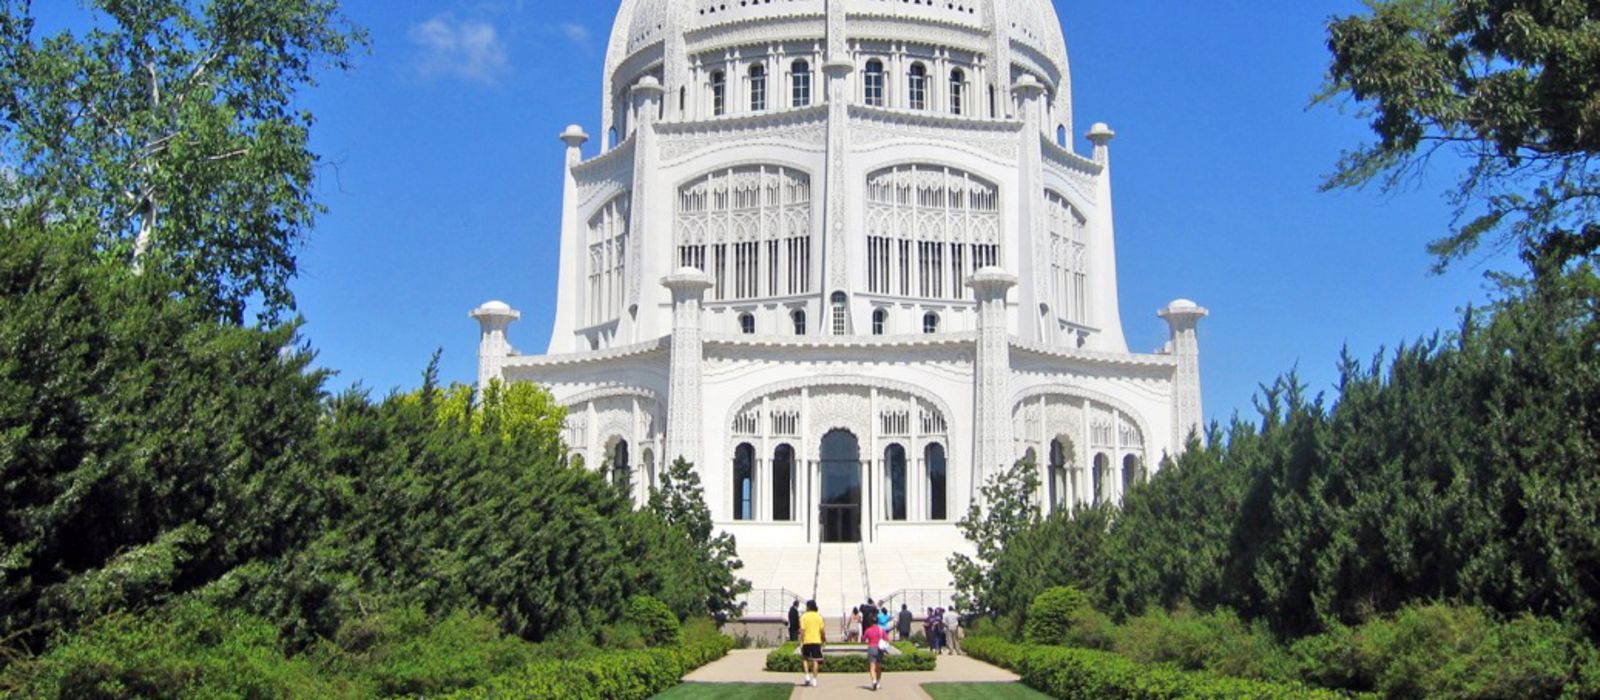 Baha'i House of Worship in Wilmette